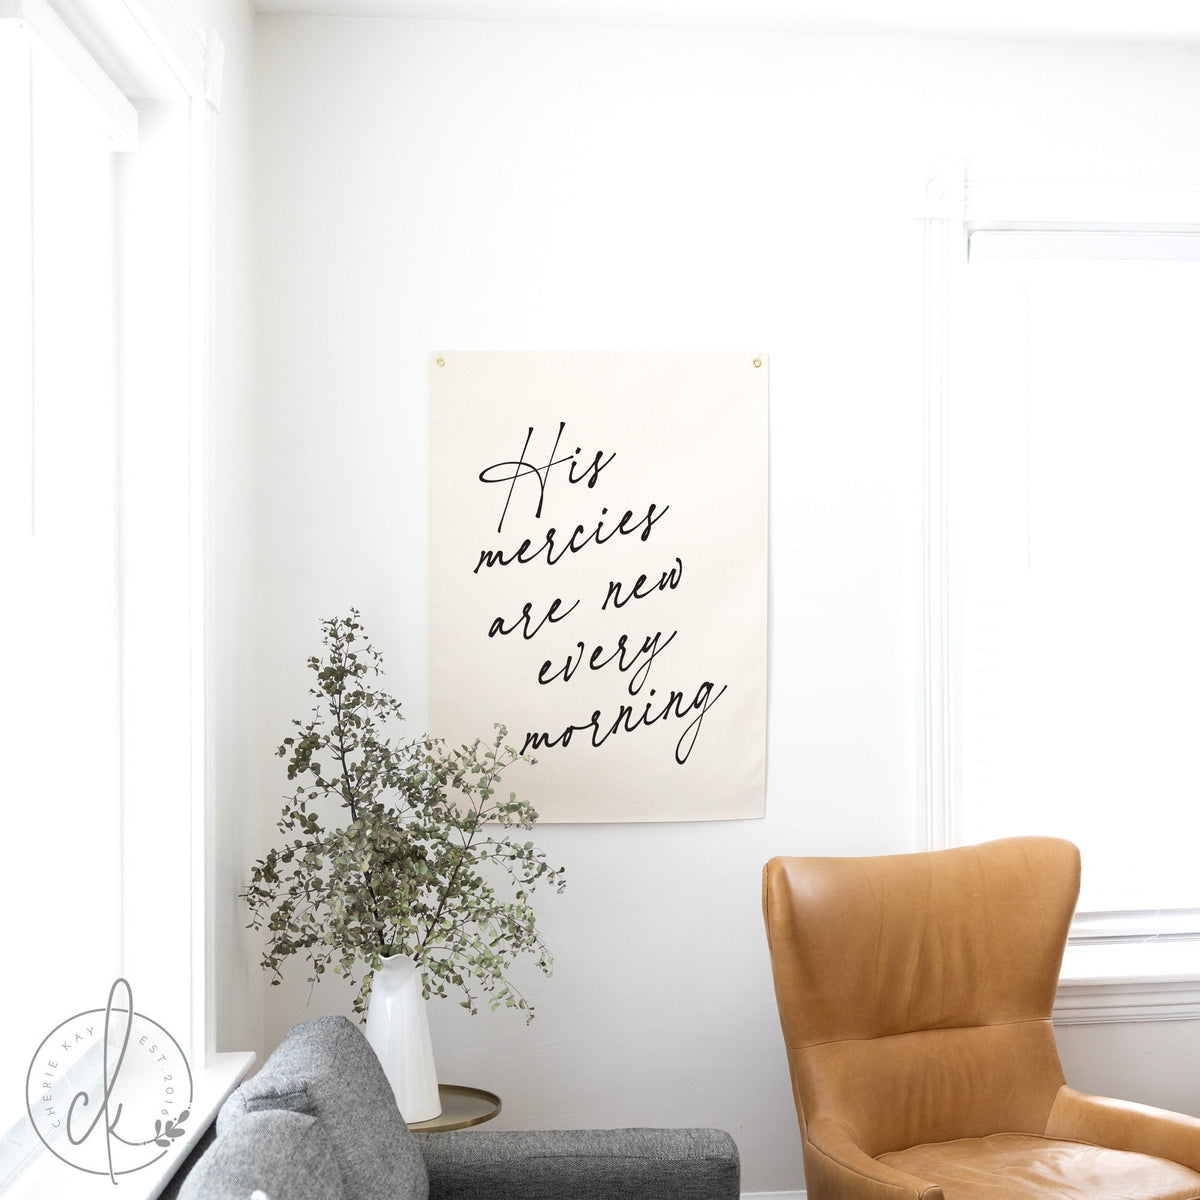 His Mercies Are New Every Morning | Fabric Wall Hanging | Christian Wall Art | Inspirational Art | Living Room Decor | Office Decor